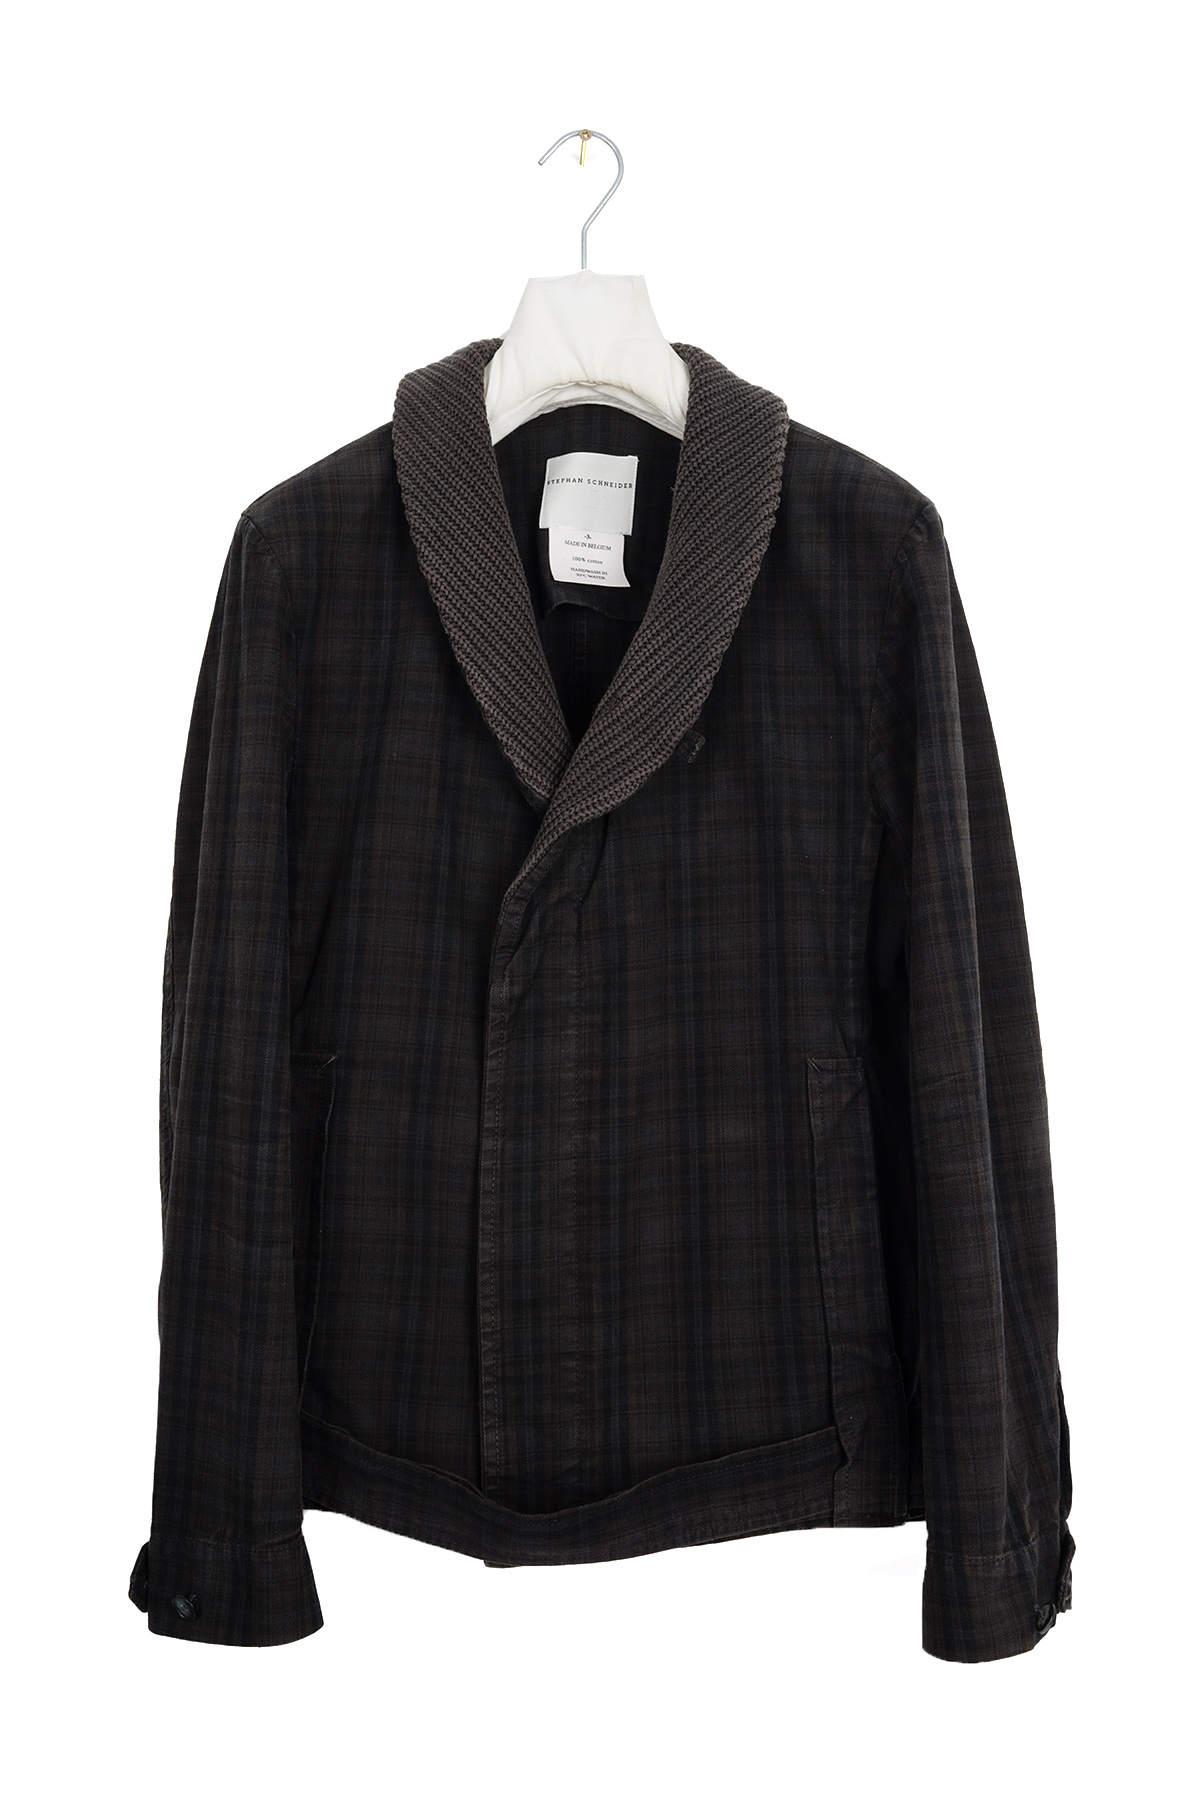 2006 A/W SHAWL COLLAR JACKET IN OVERDYED COTTON - 1